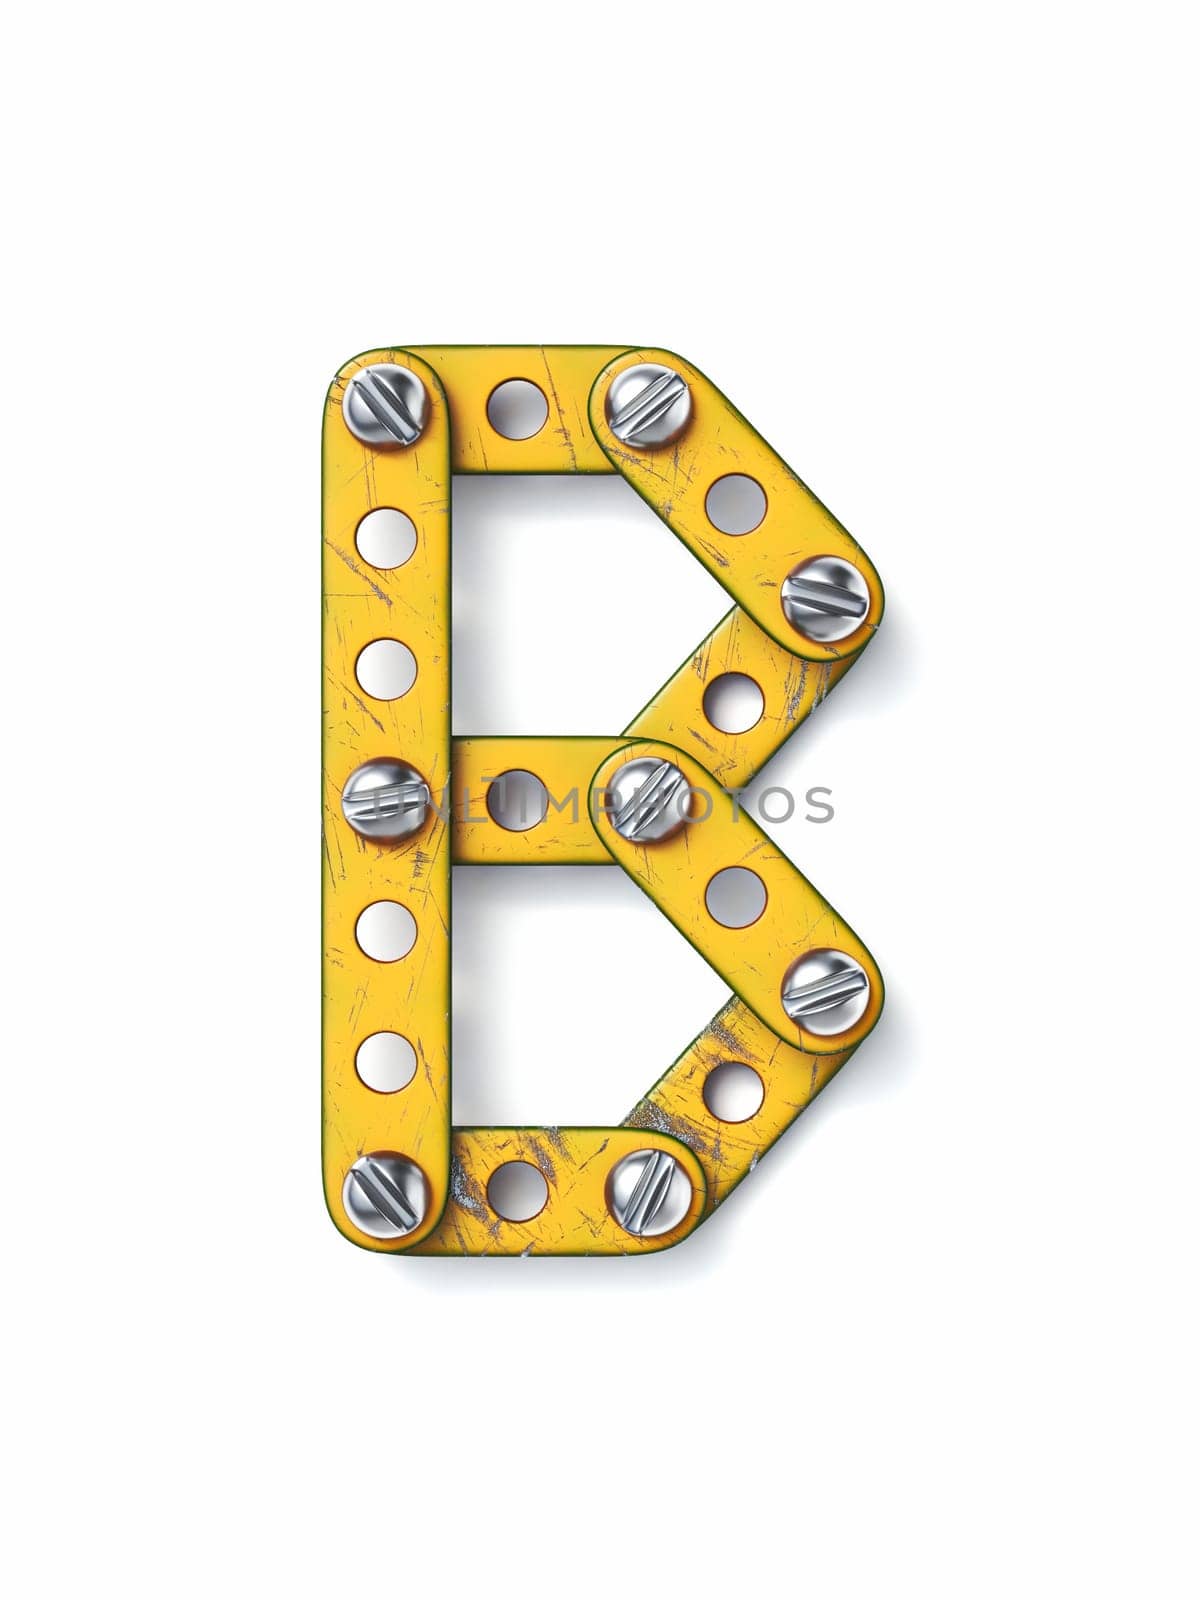 Aged yellow constructor font Letter B 3D by djmilic